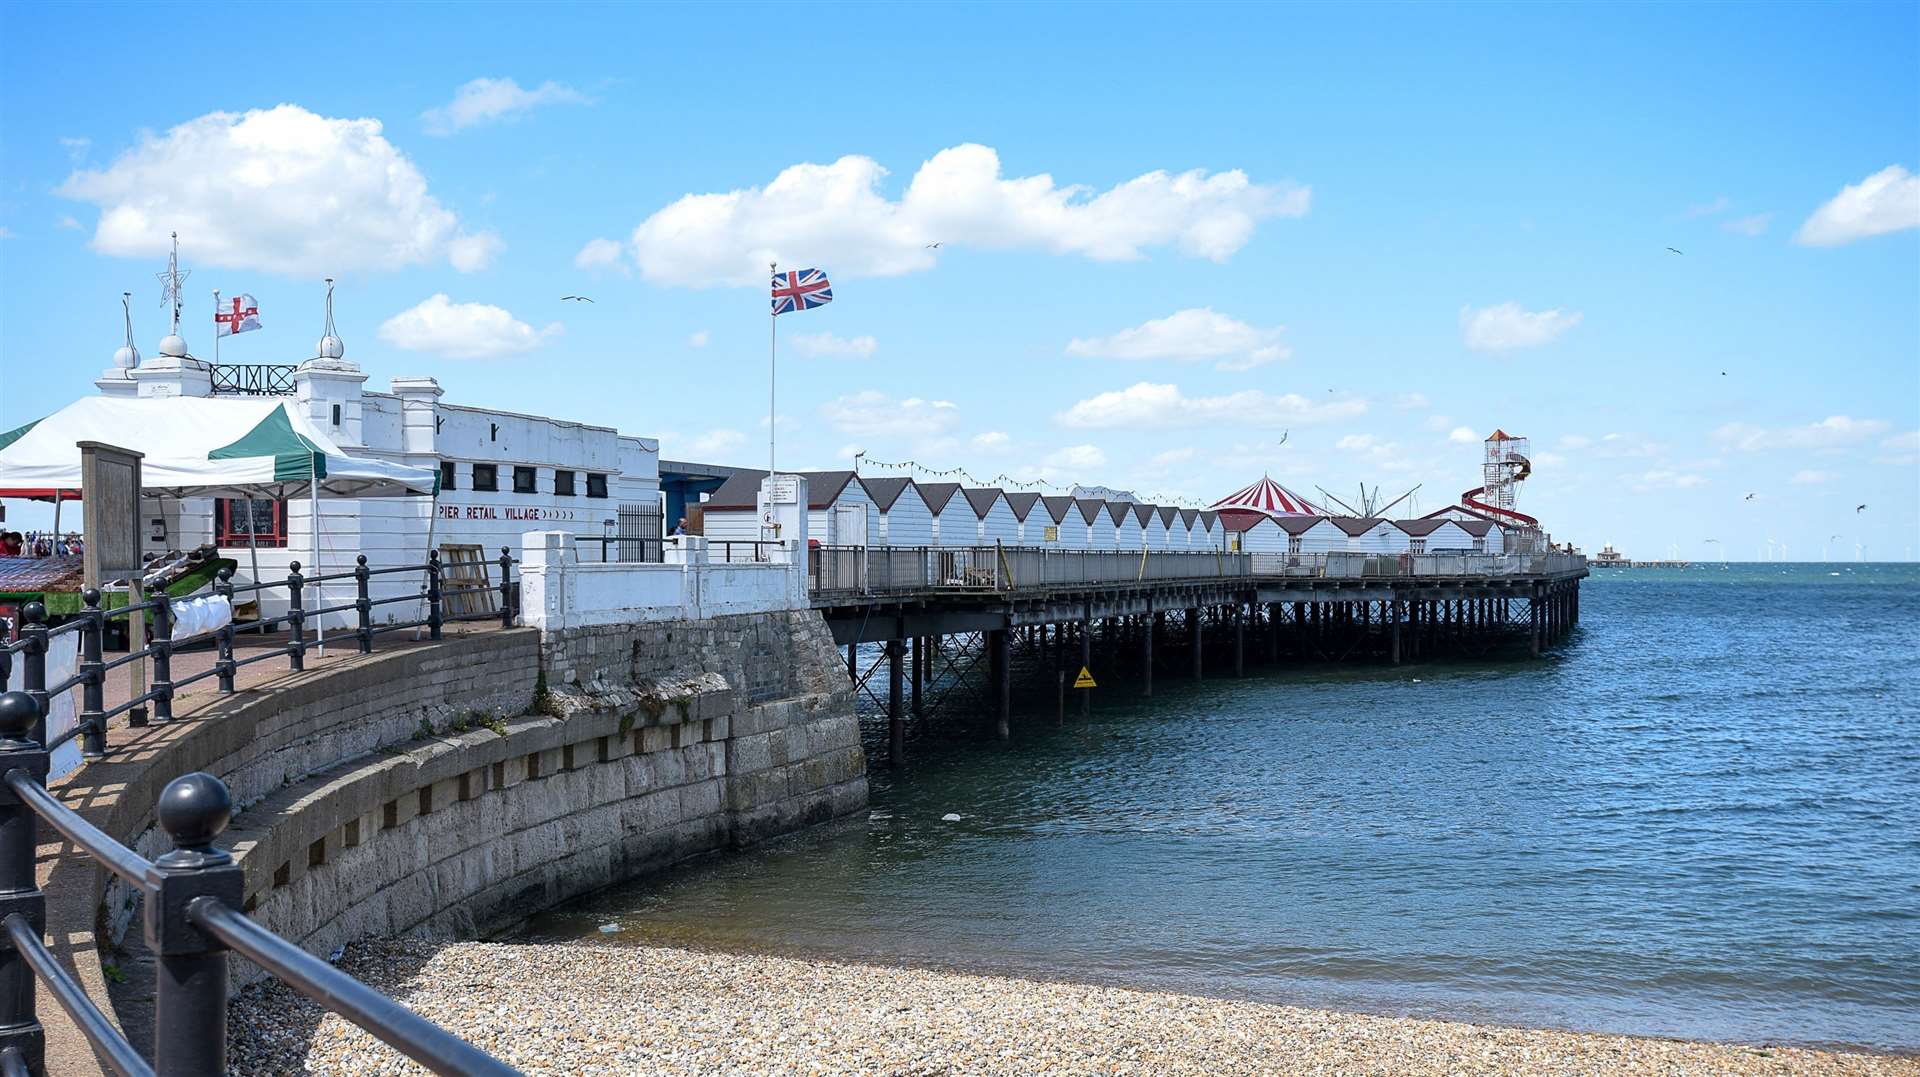 Kumiko was last seen jumping off Herne Bay pier and into the sea. Stock image: Alan Langley